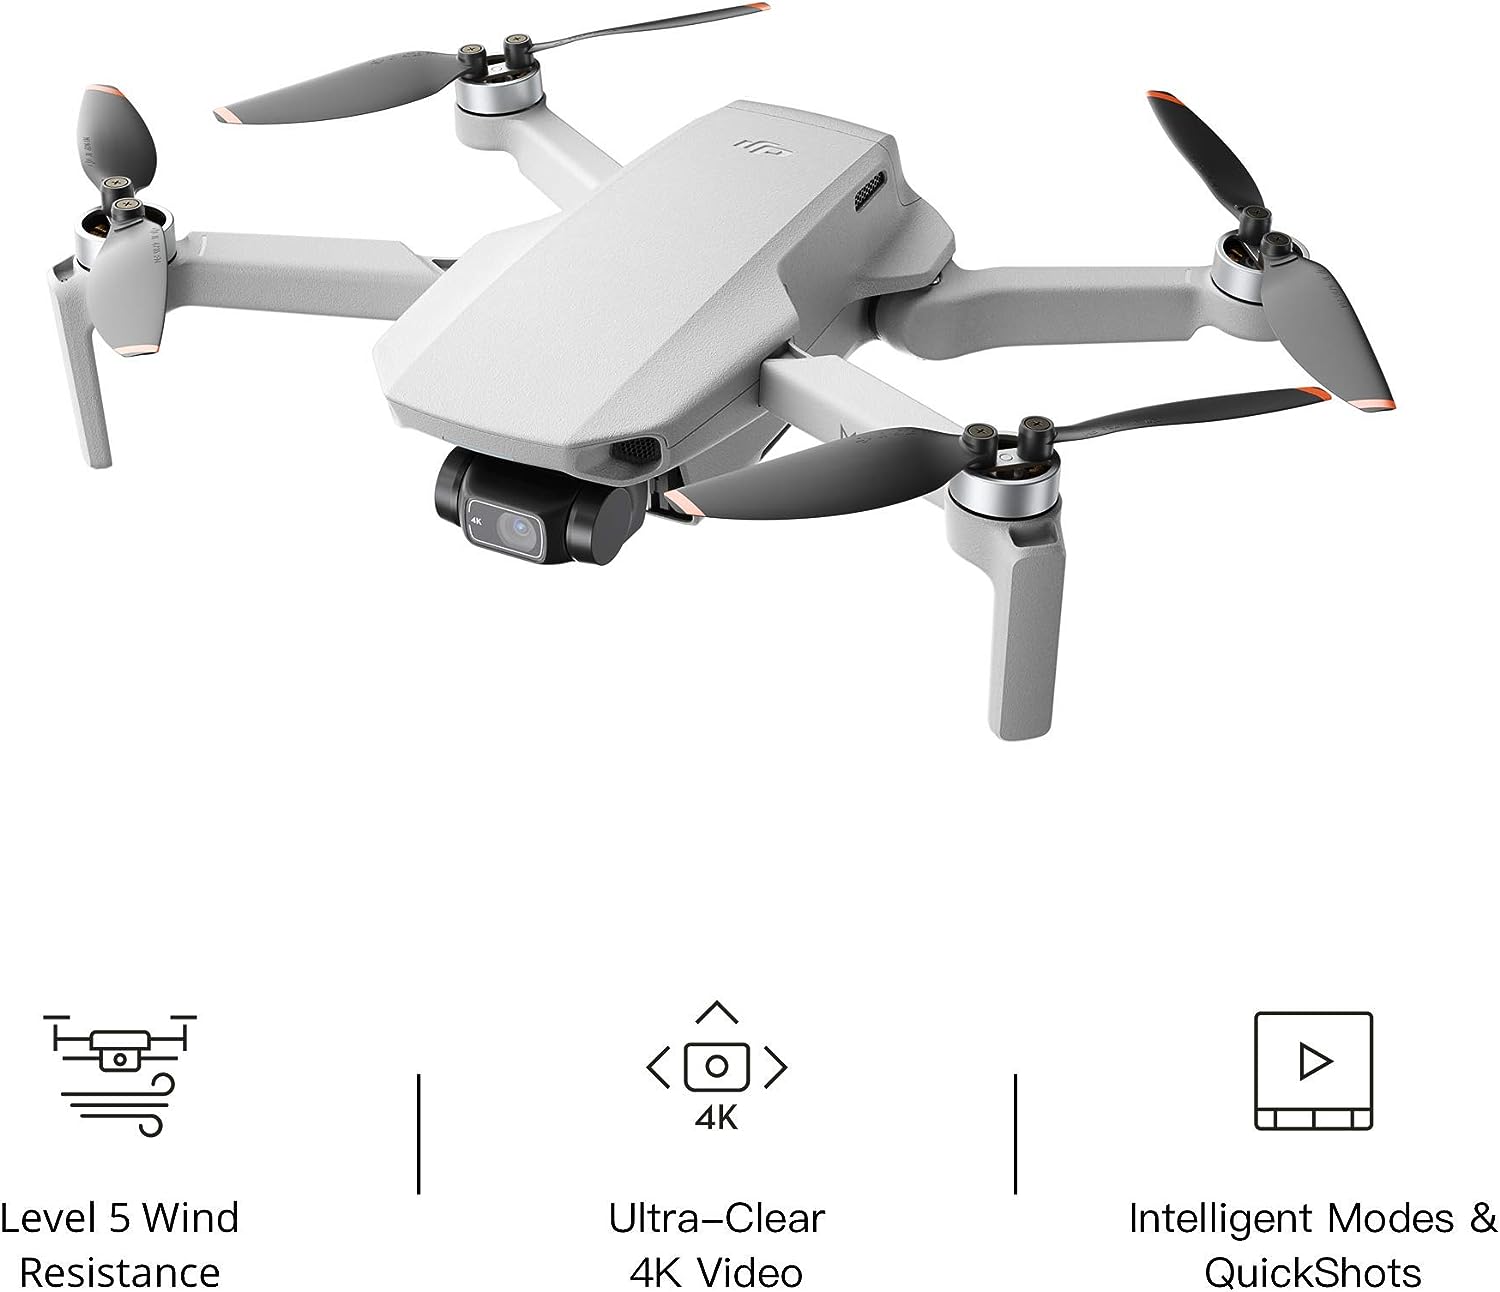 DJI Mini 2 Ultralight & Foldable Drone Quadcopter with Remote Controller - Gray (Renewed)